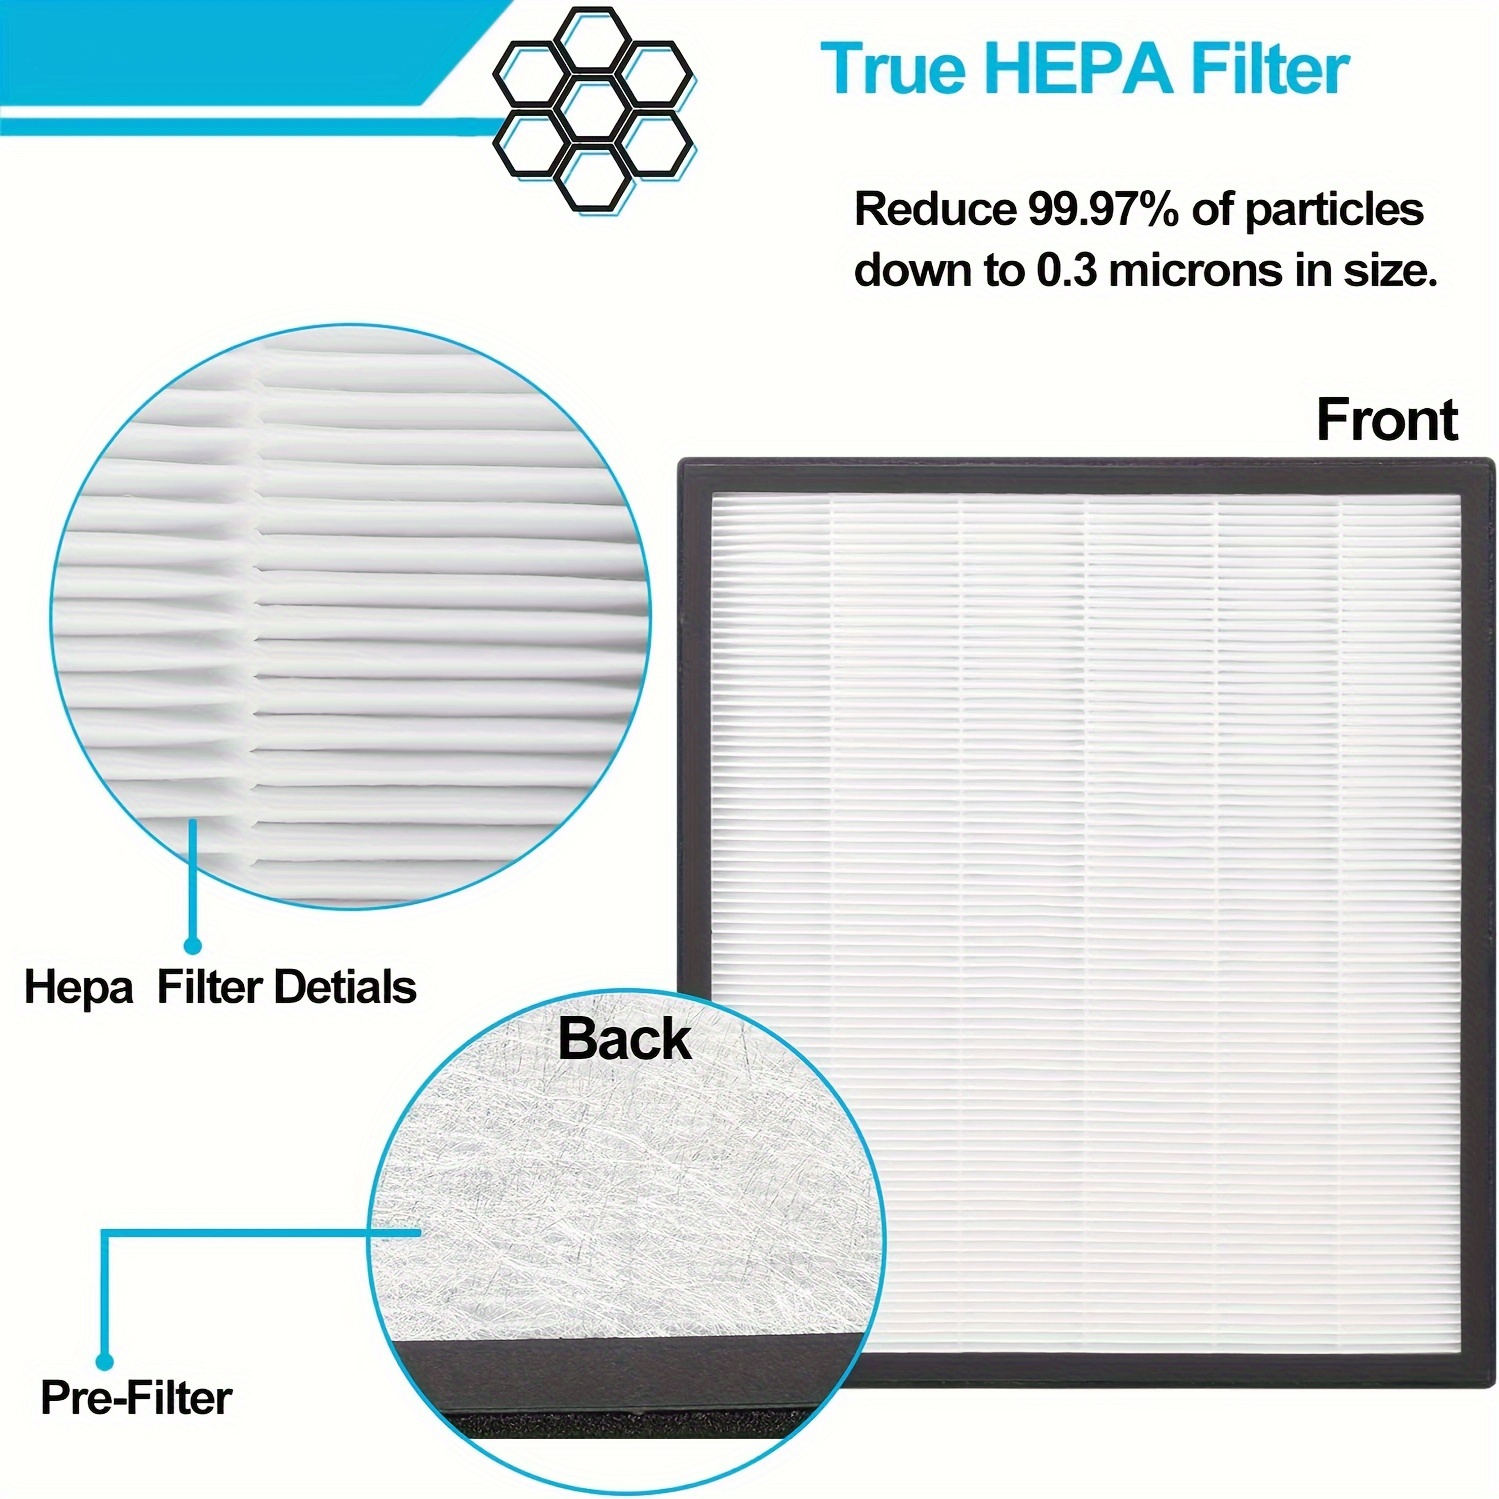 LV-PUR131 Filter Replacement, H13 True HEPA Filter for LEVOIT Air Purifier  LV-PUR131, Activated Carbon Filter Set Compatible with LEVOIT LV-PUR131S